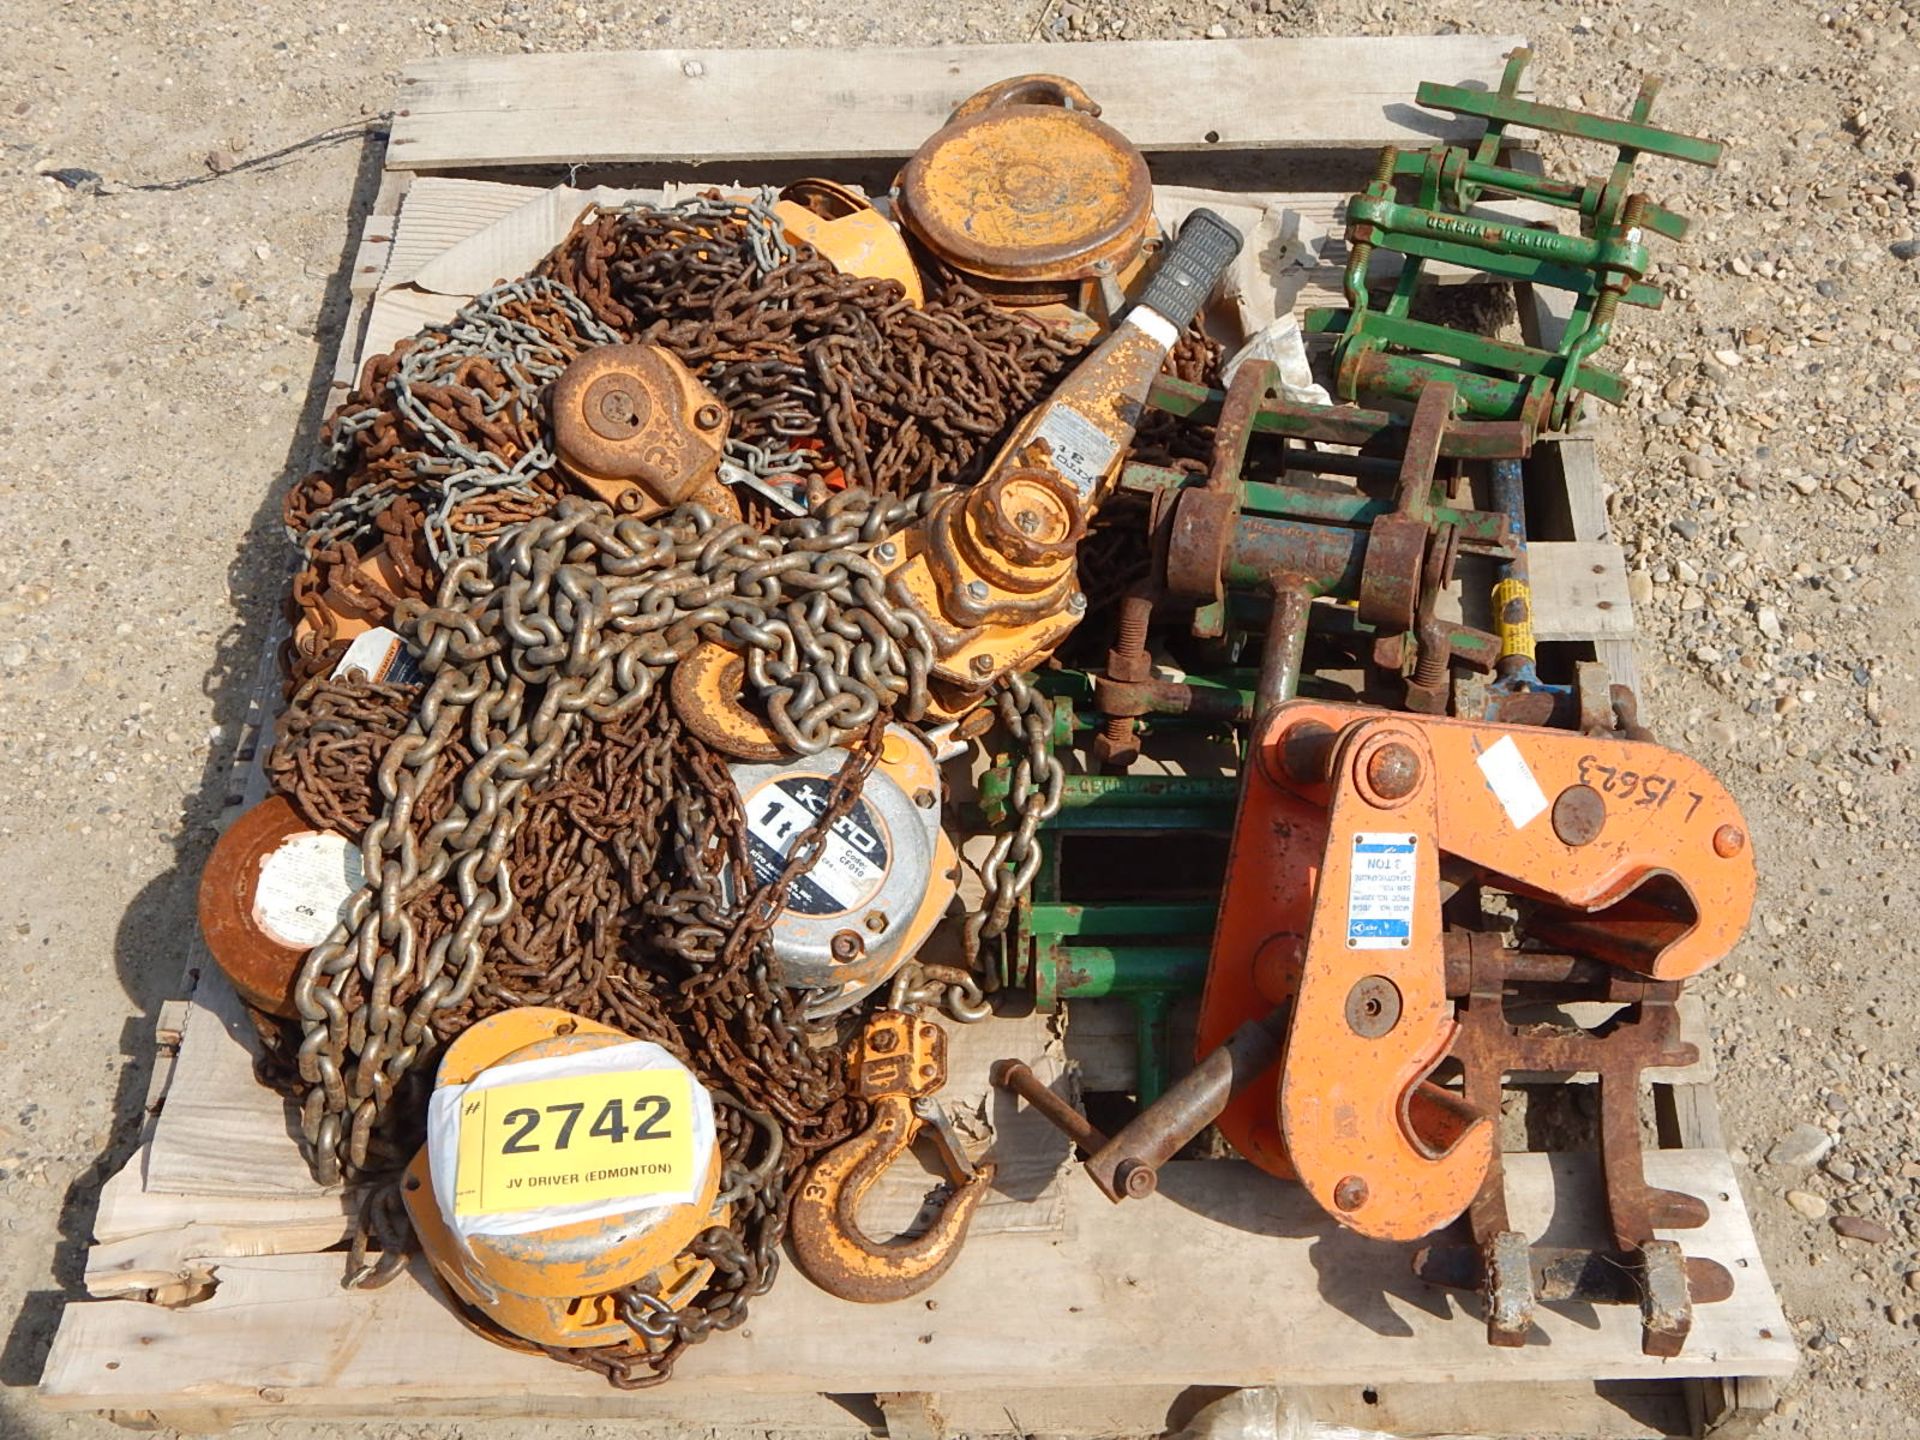 LOT/ CONTENTS OF PALLET CONSISTING OF KITO CHAIN FALLS AND I BEAM LIFTING CLAMPS